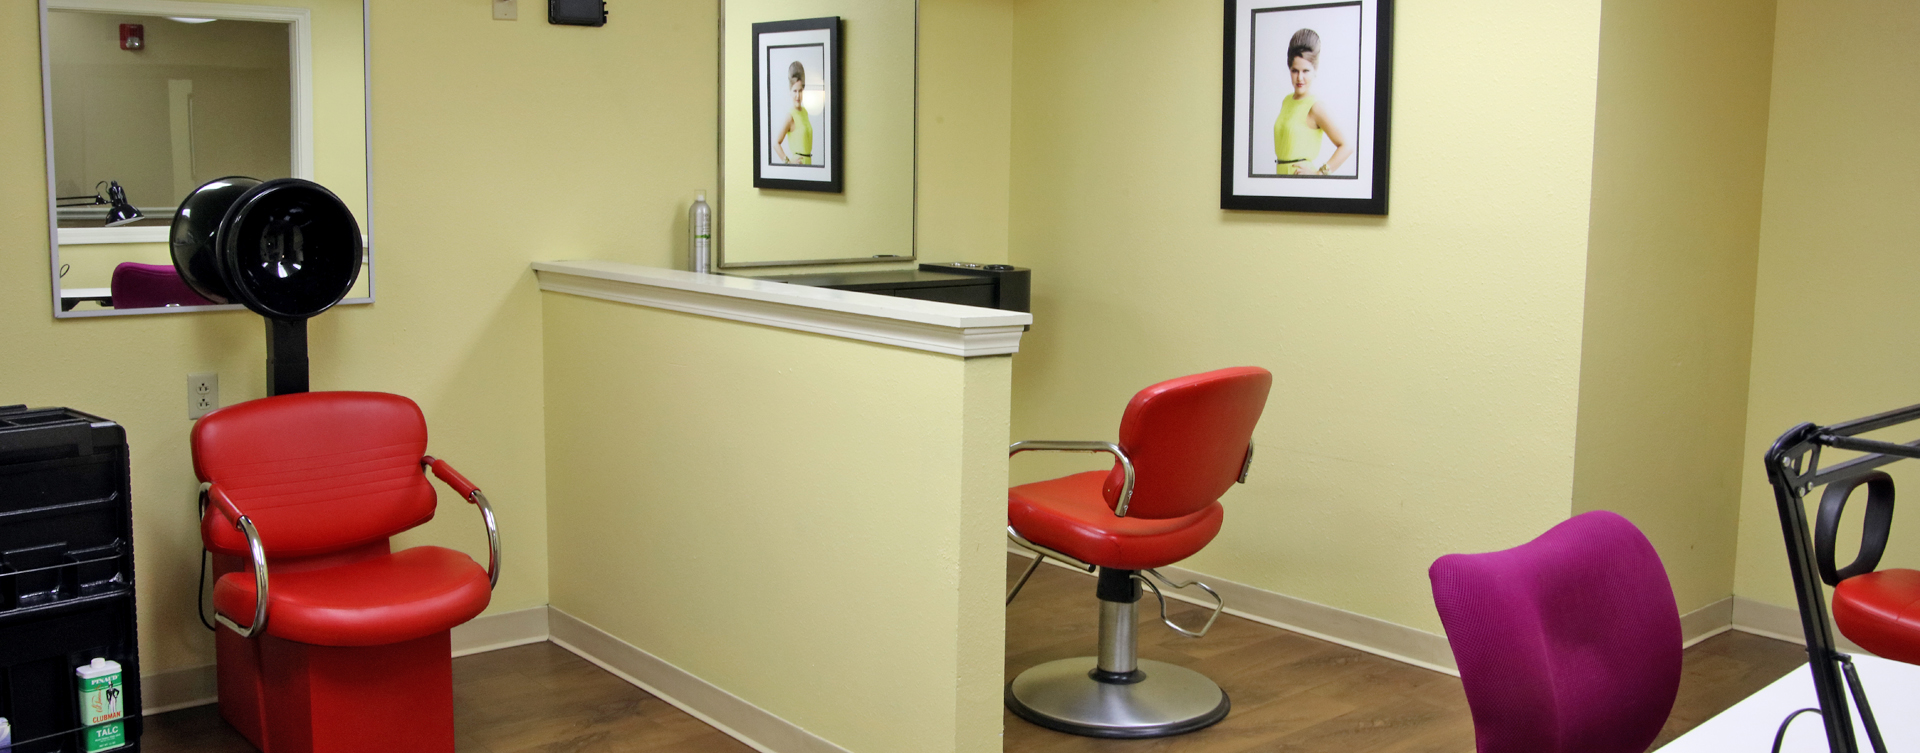 Strut on in and find out what the buzz is all about in the salon at Bickford of Rockford